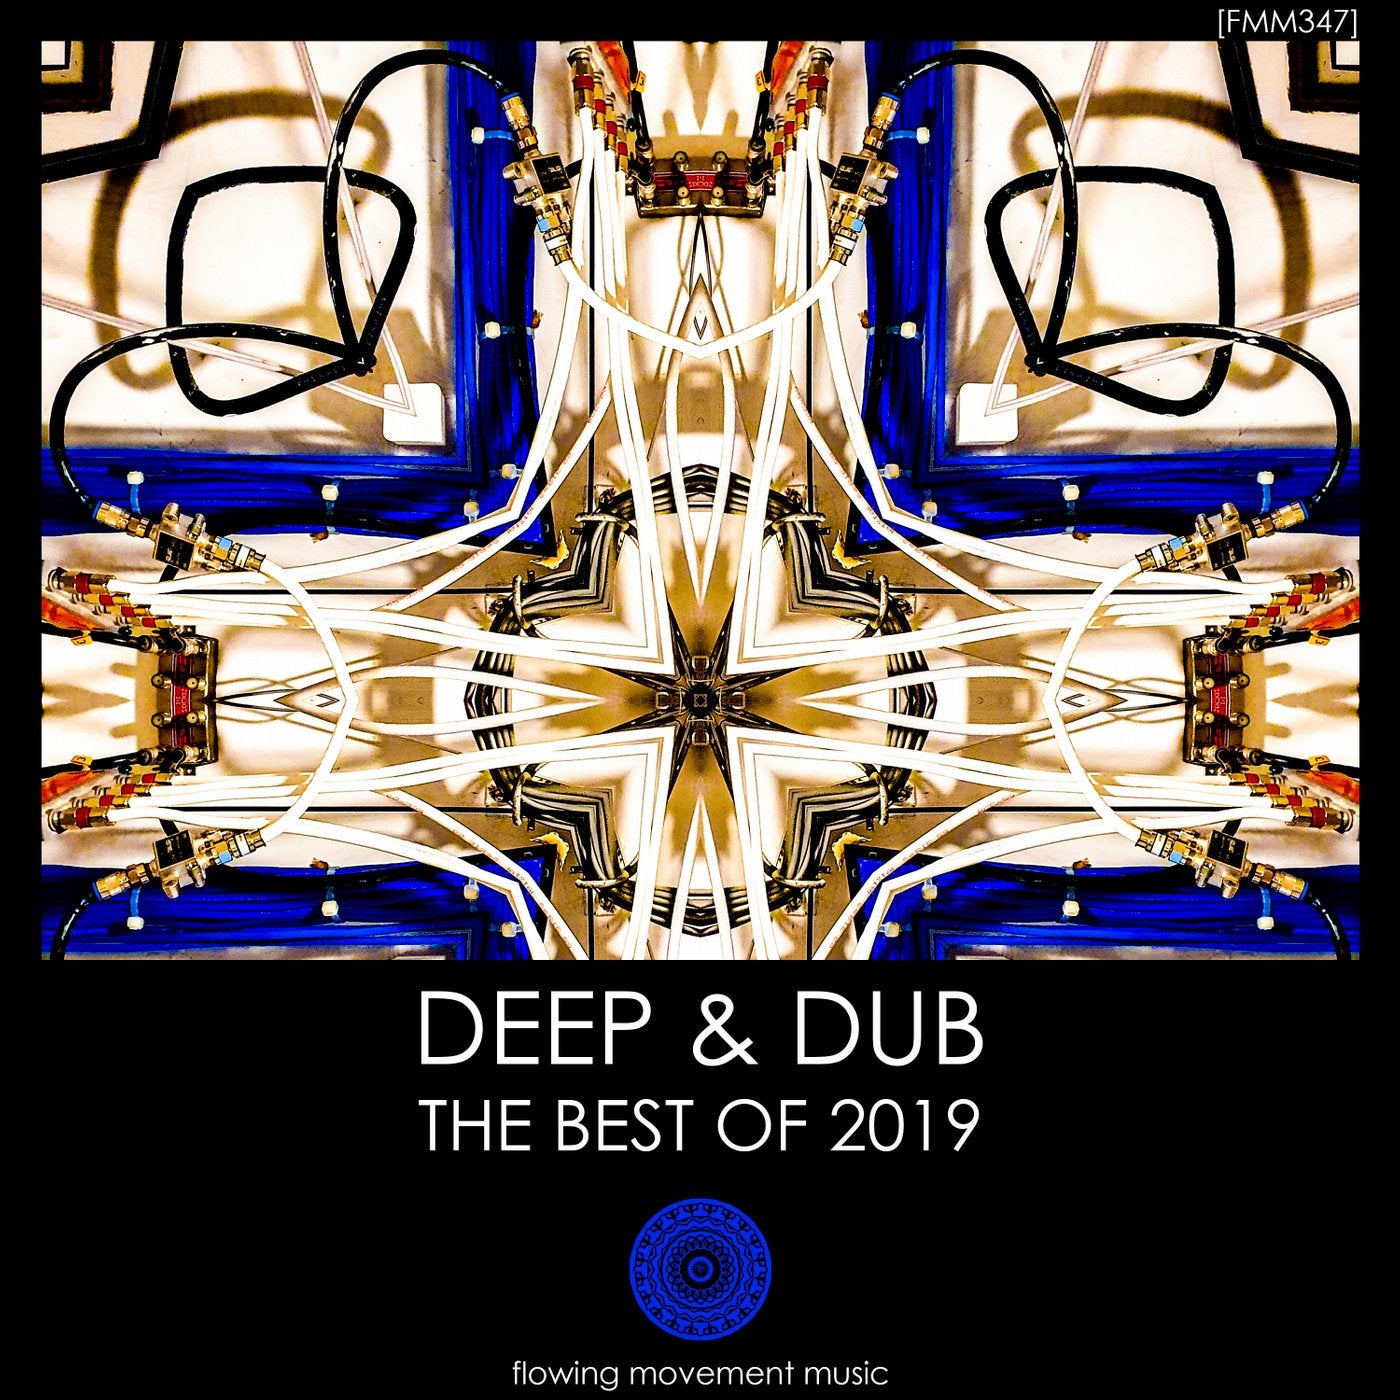 The Best Of 2019, Deep & Dub